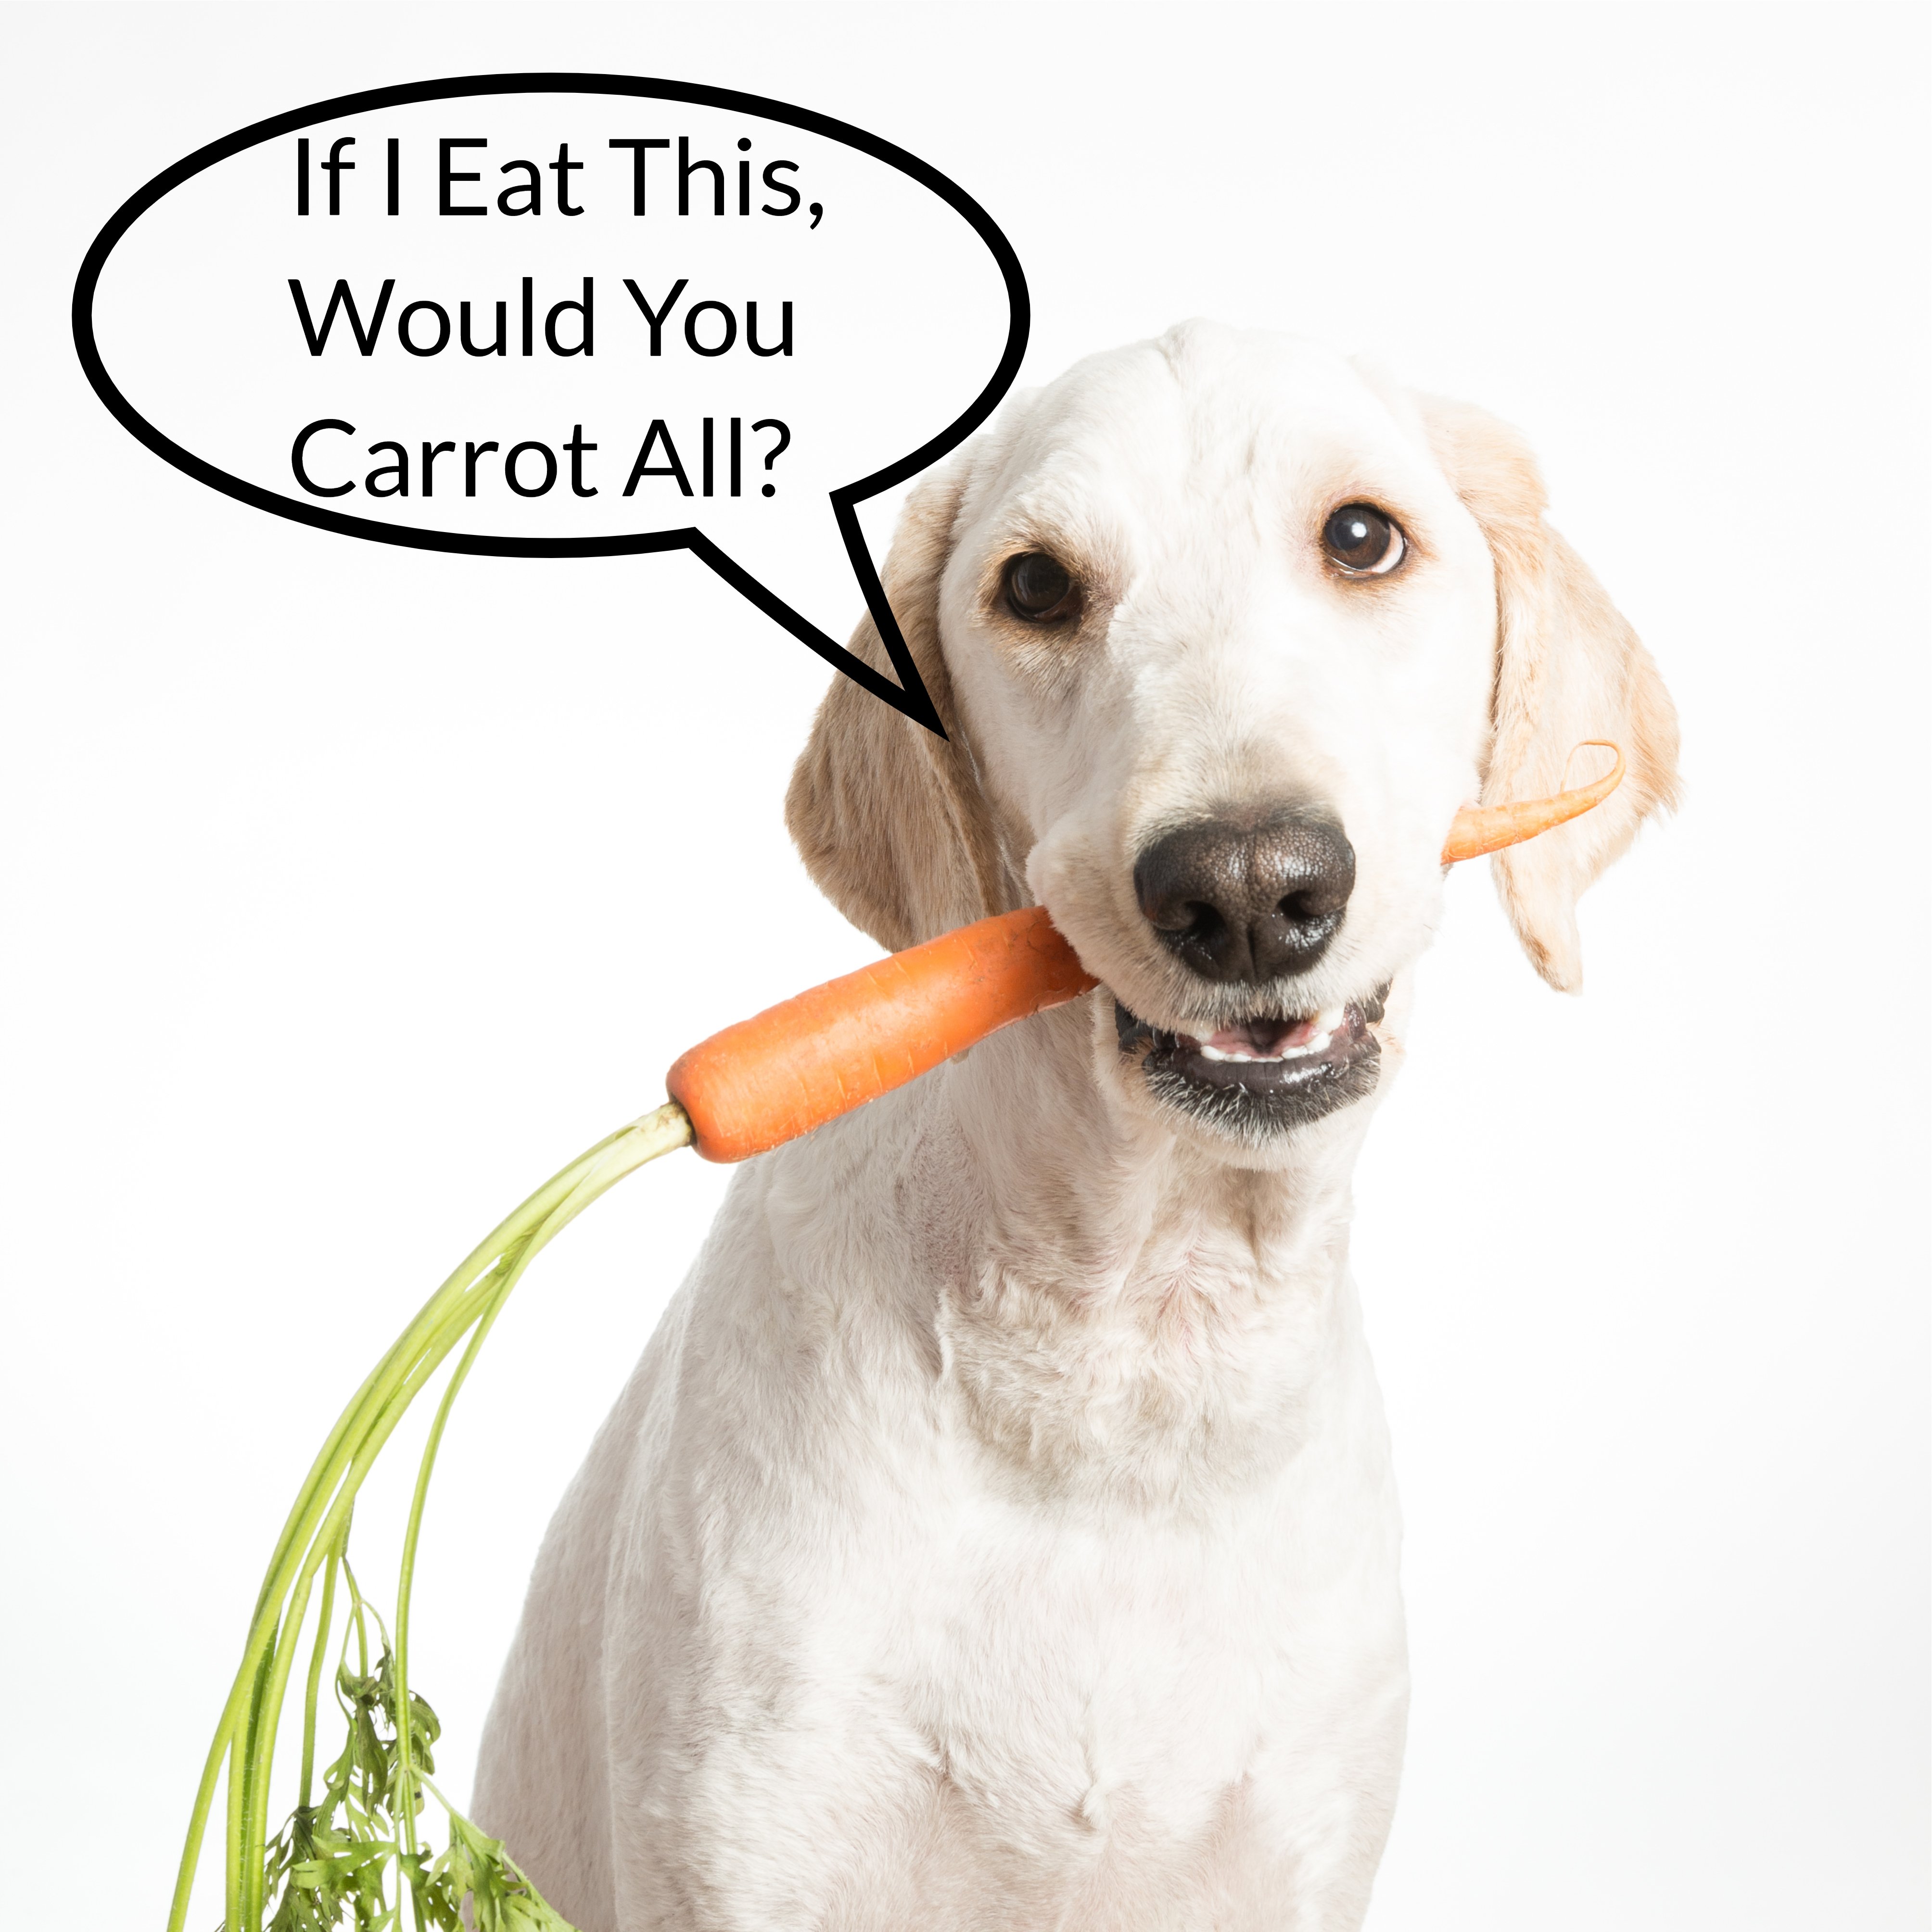 Can Dogs Eat Carrots? Are Carrots Good for Dogs? Can Dogs Have Carrots?